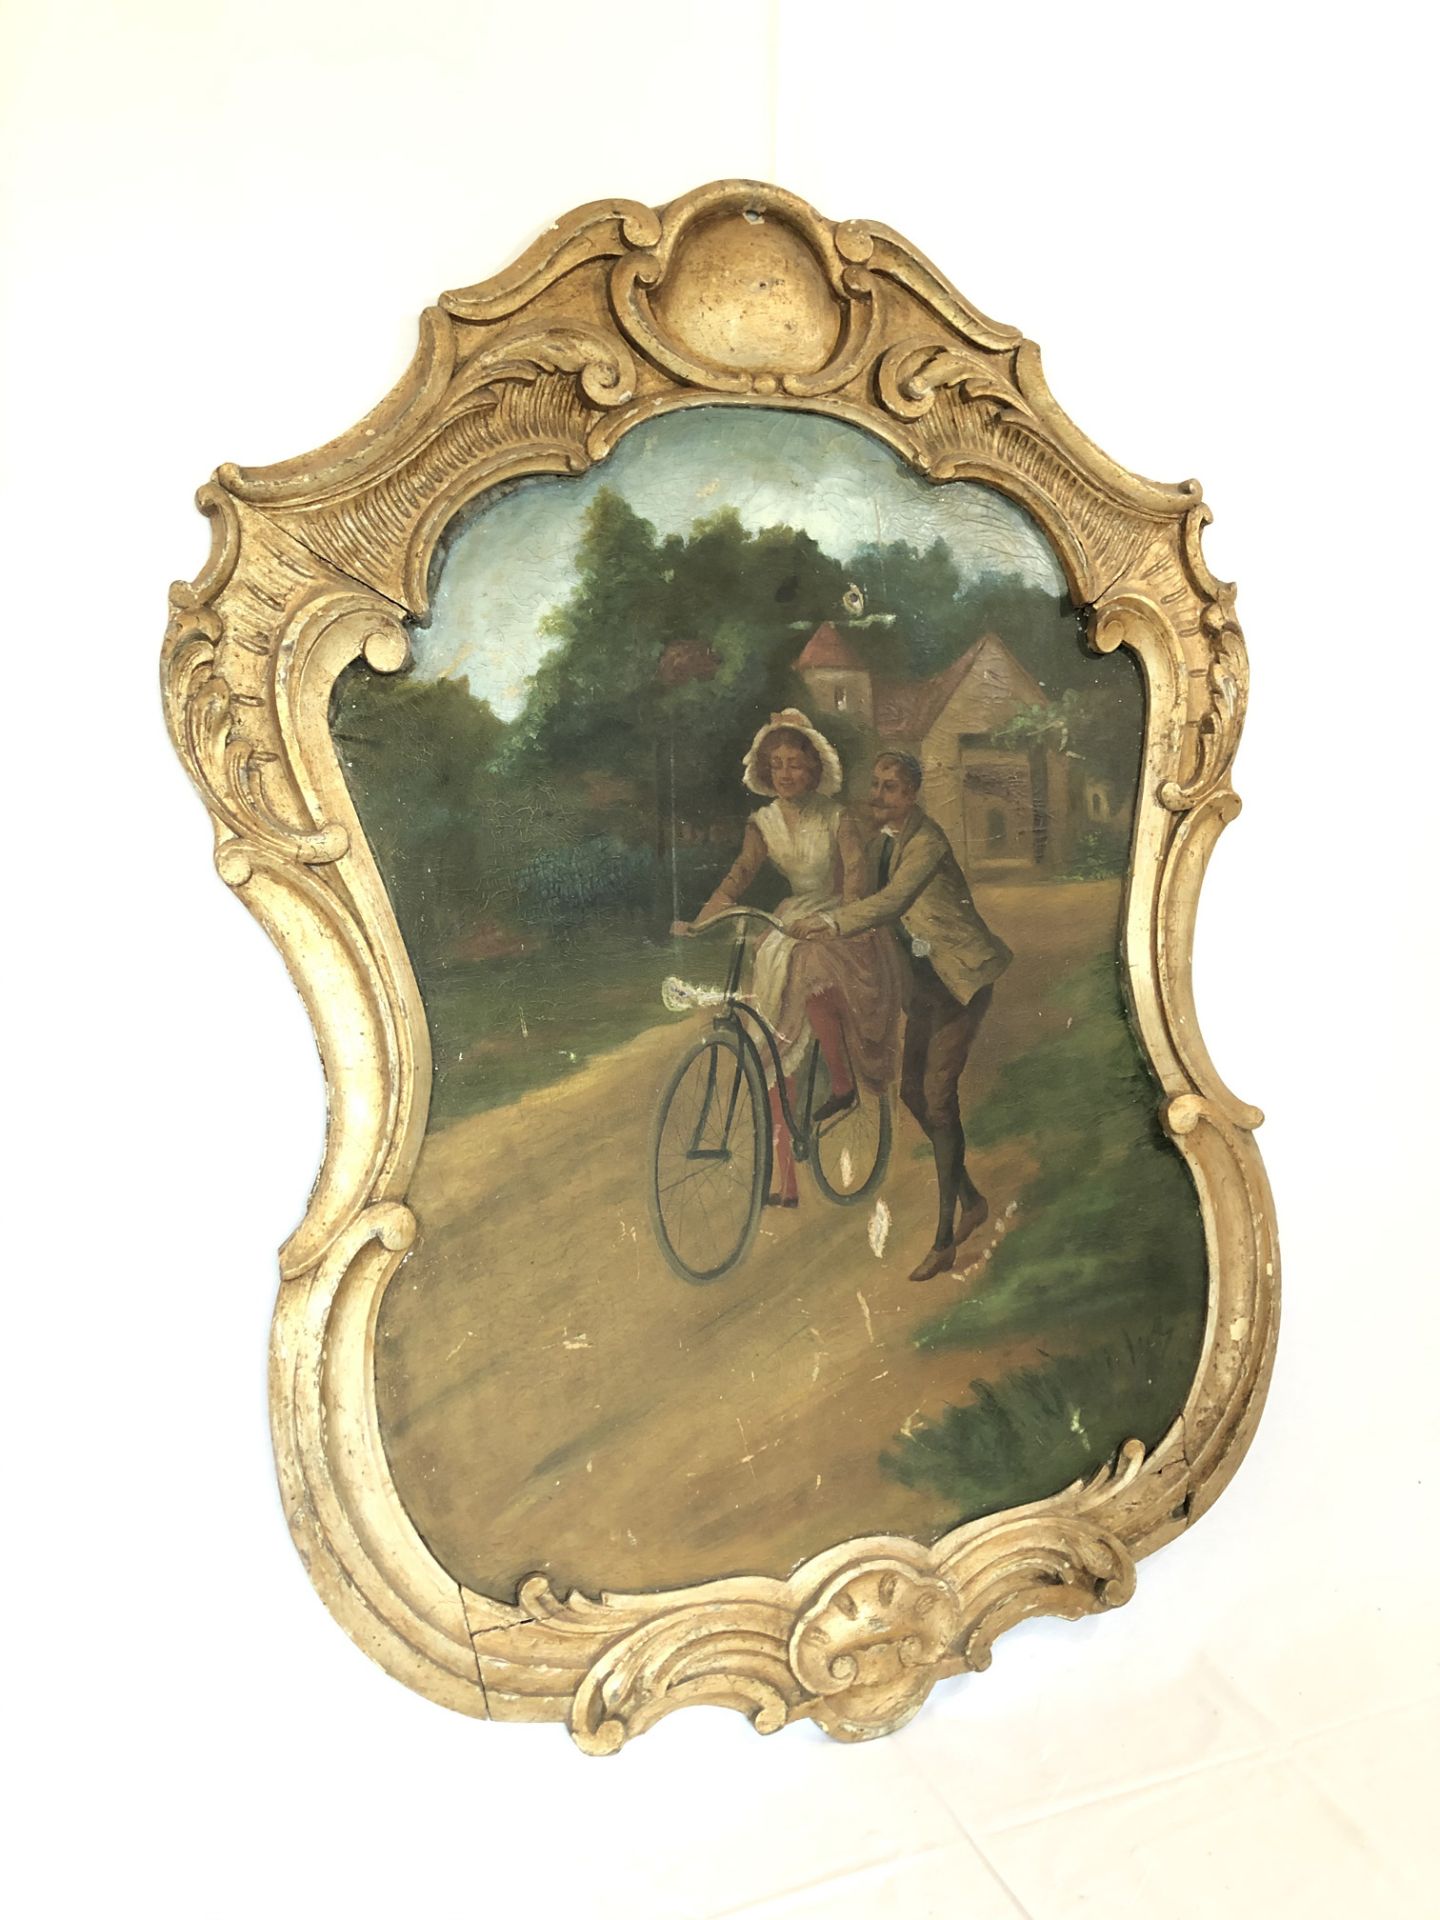 Early 1900s Wooden Fairground Panel with a Painting on Linen - Image 2 of 4